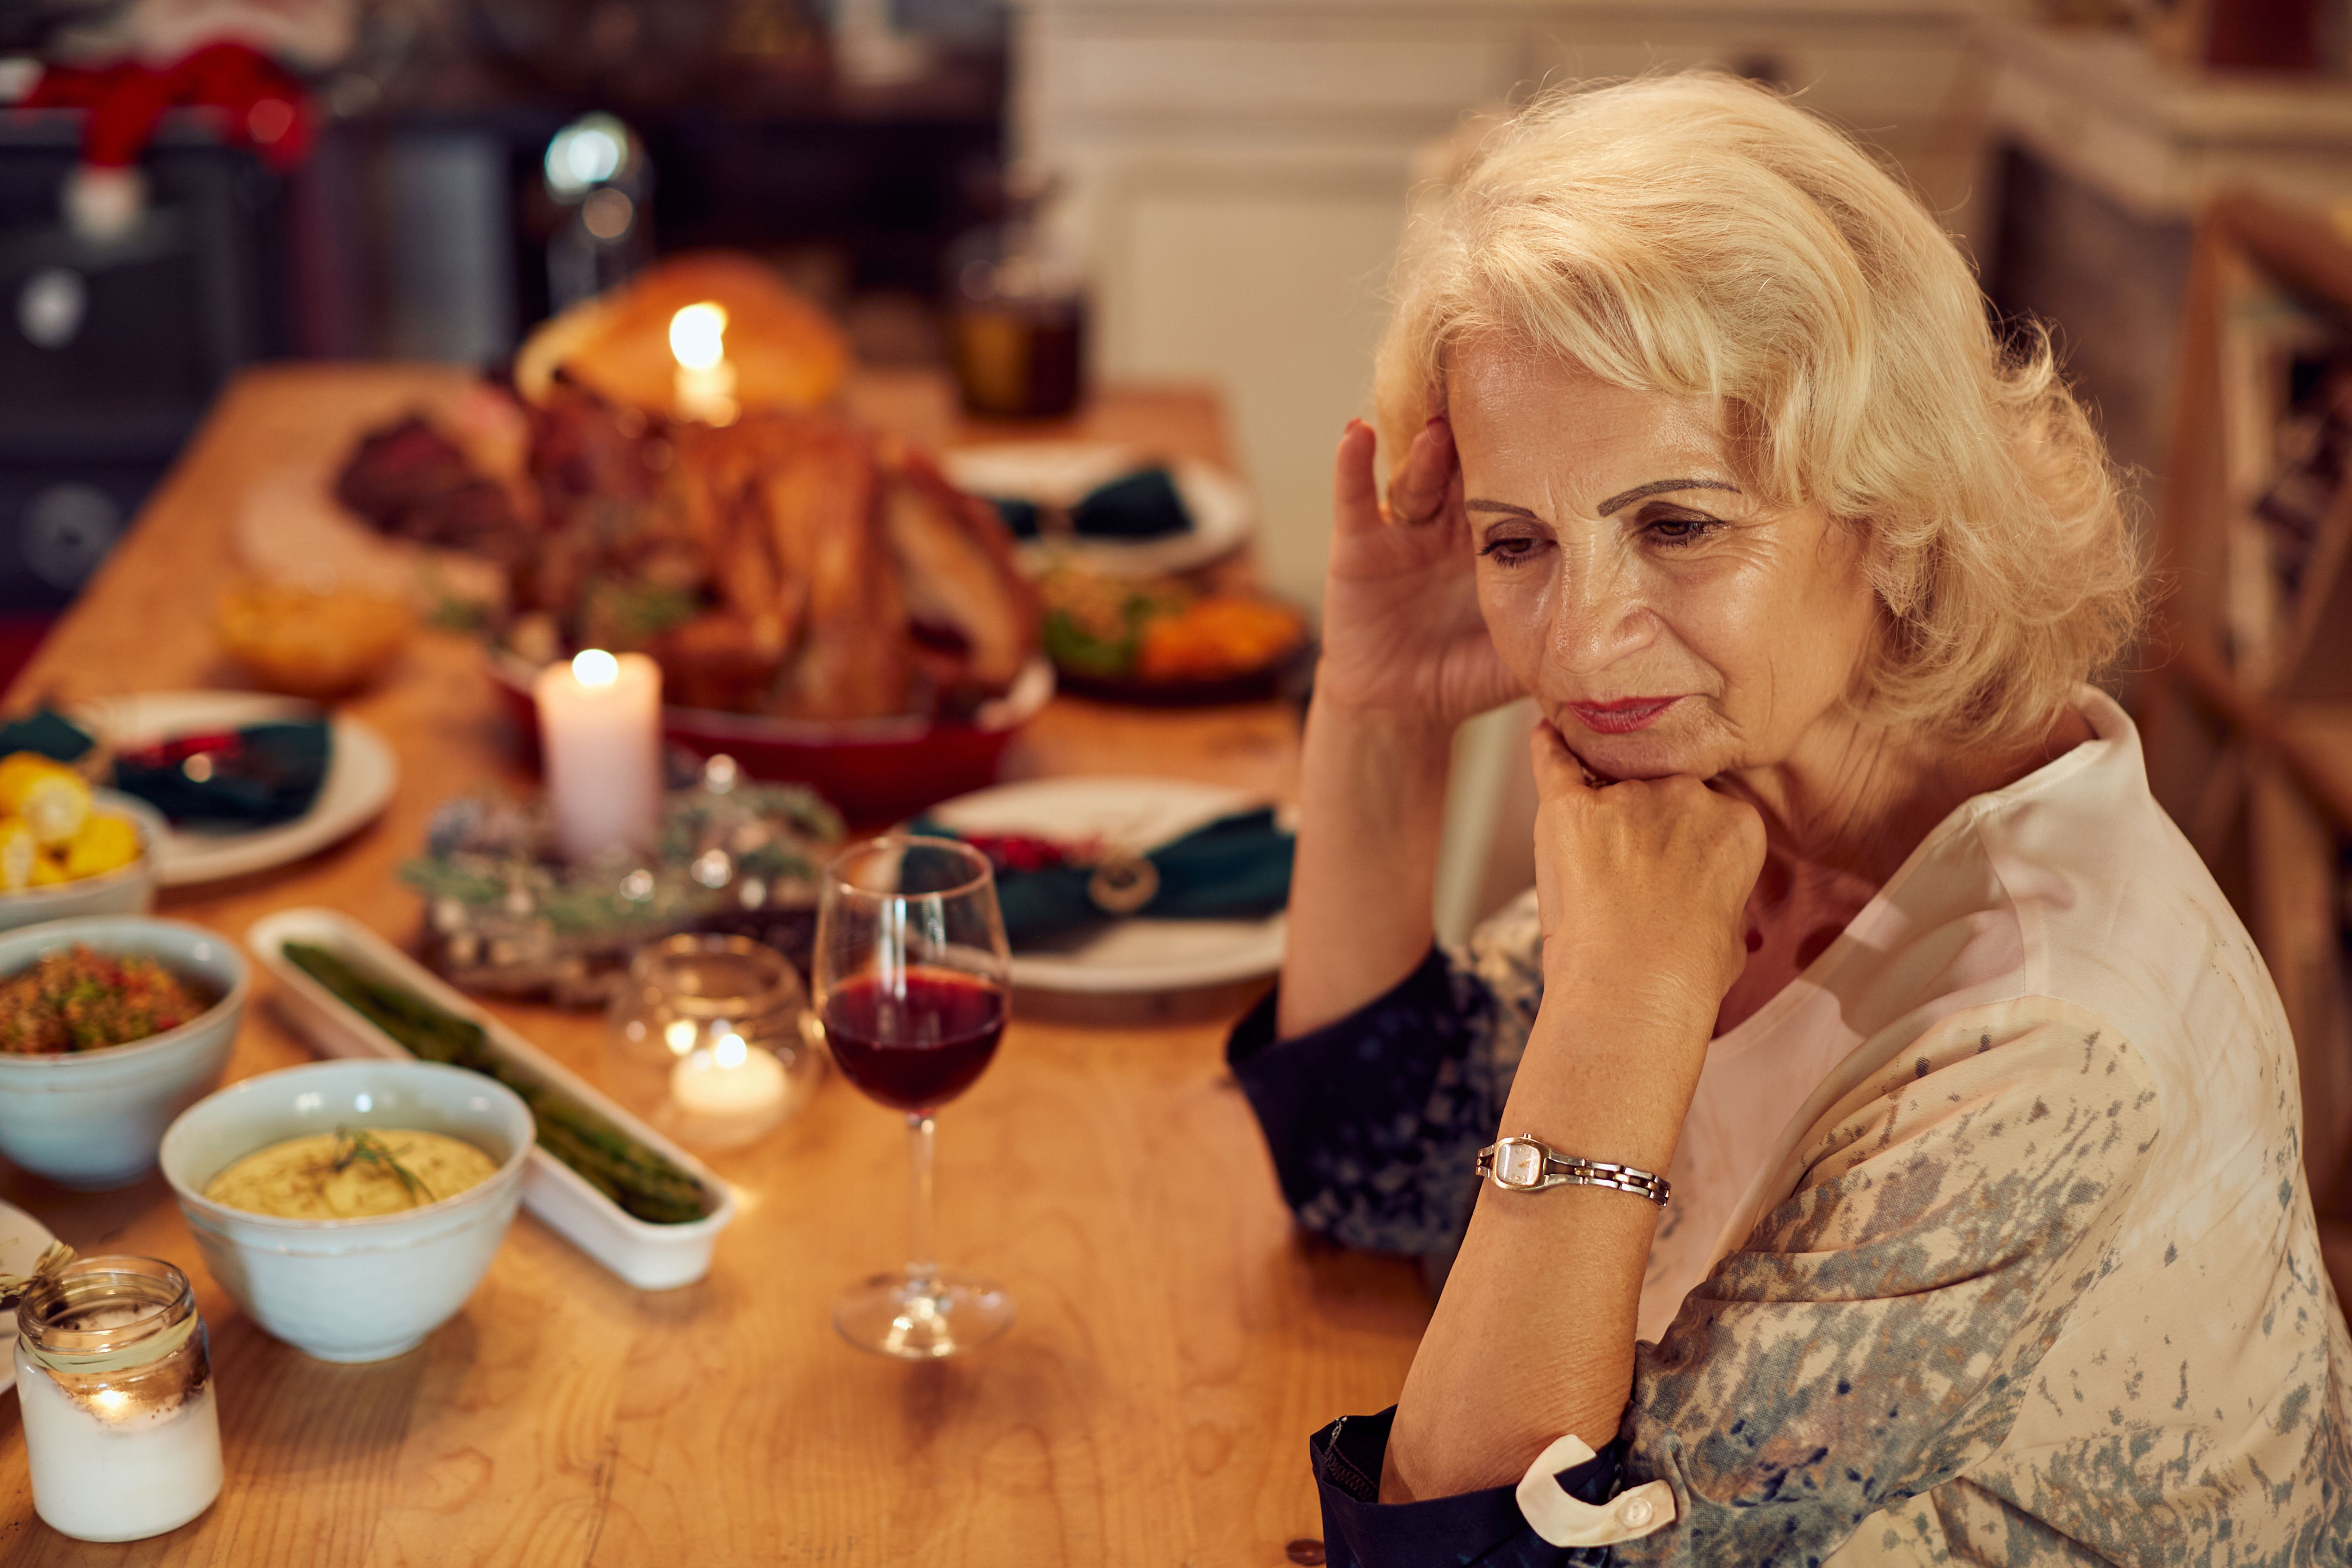 An elder woman upset at a dinner table | Source: Getty Images